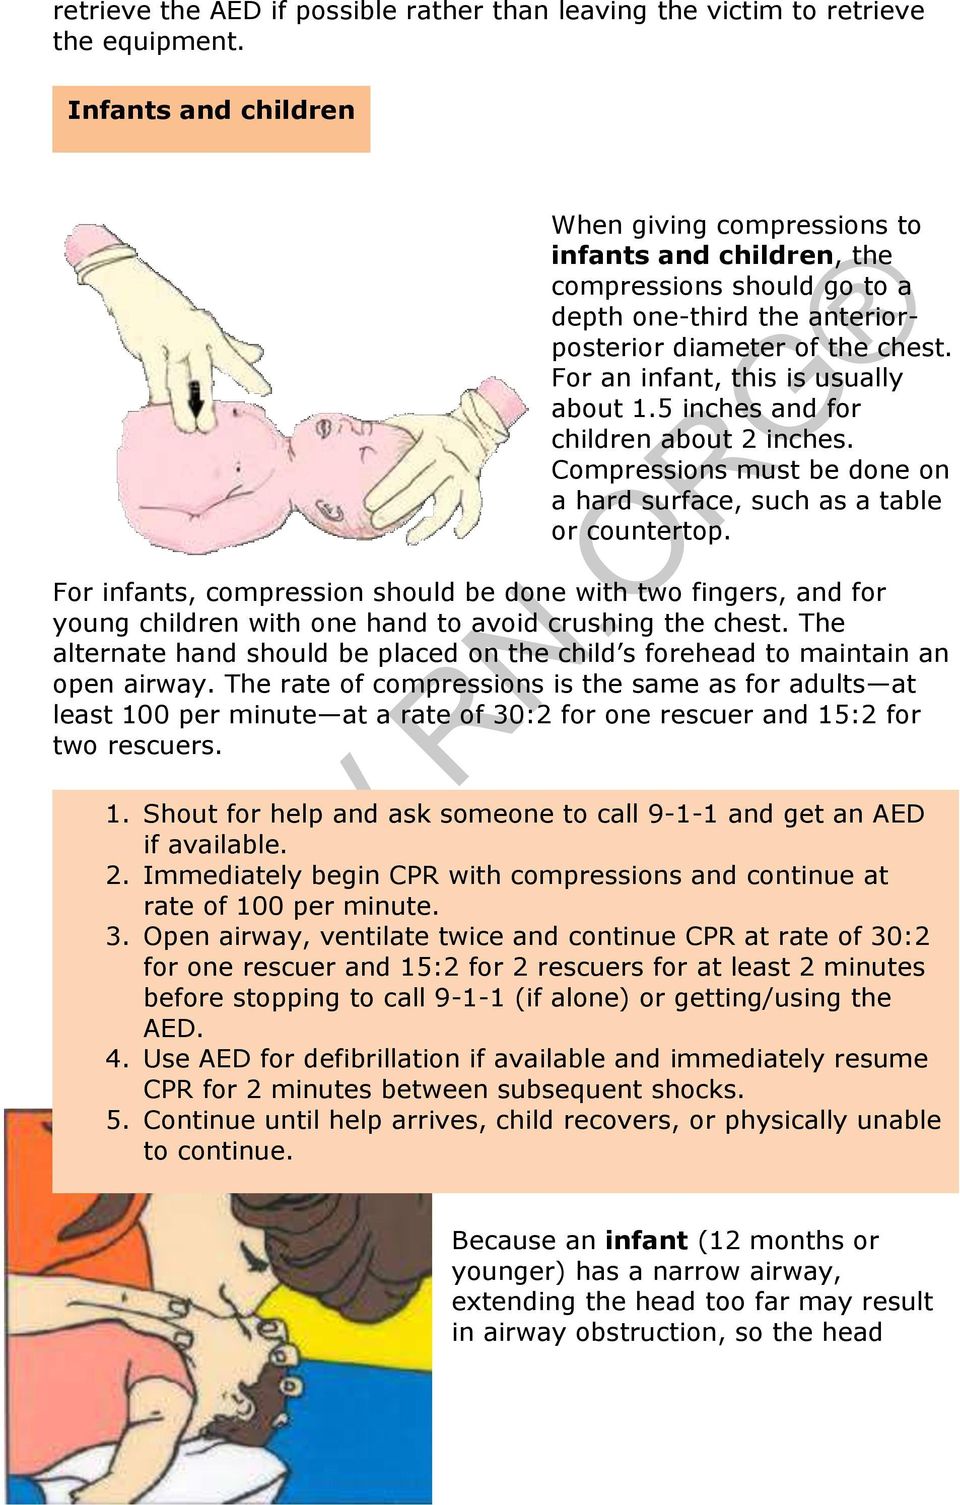 For an infant, this is usually about 1.5 inches and for children about 2 inches. Compressions must be done on a hard surface, such as a table or countertop.